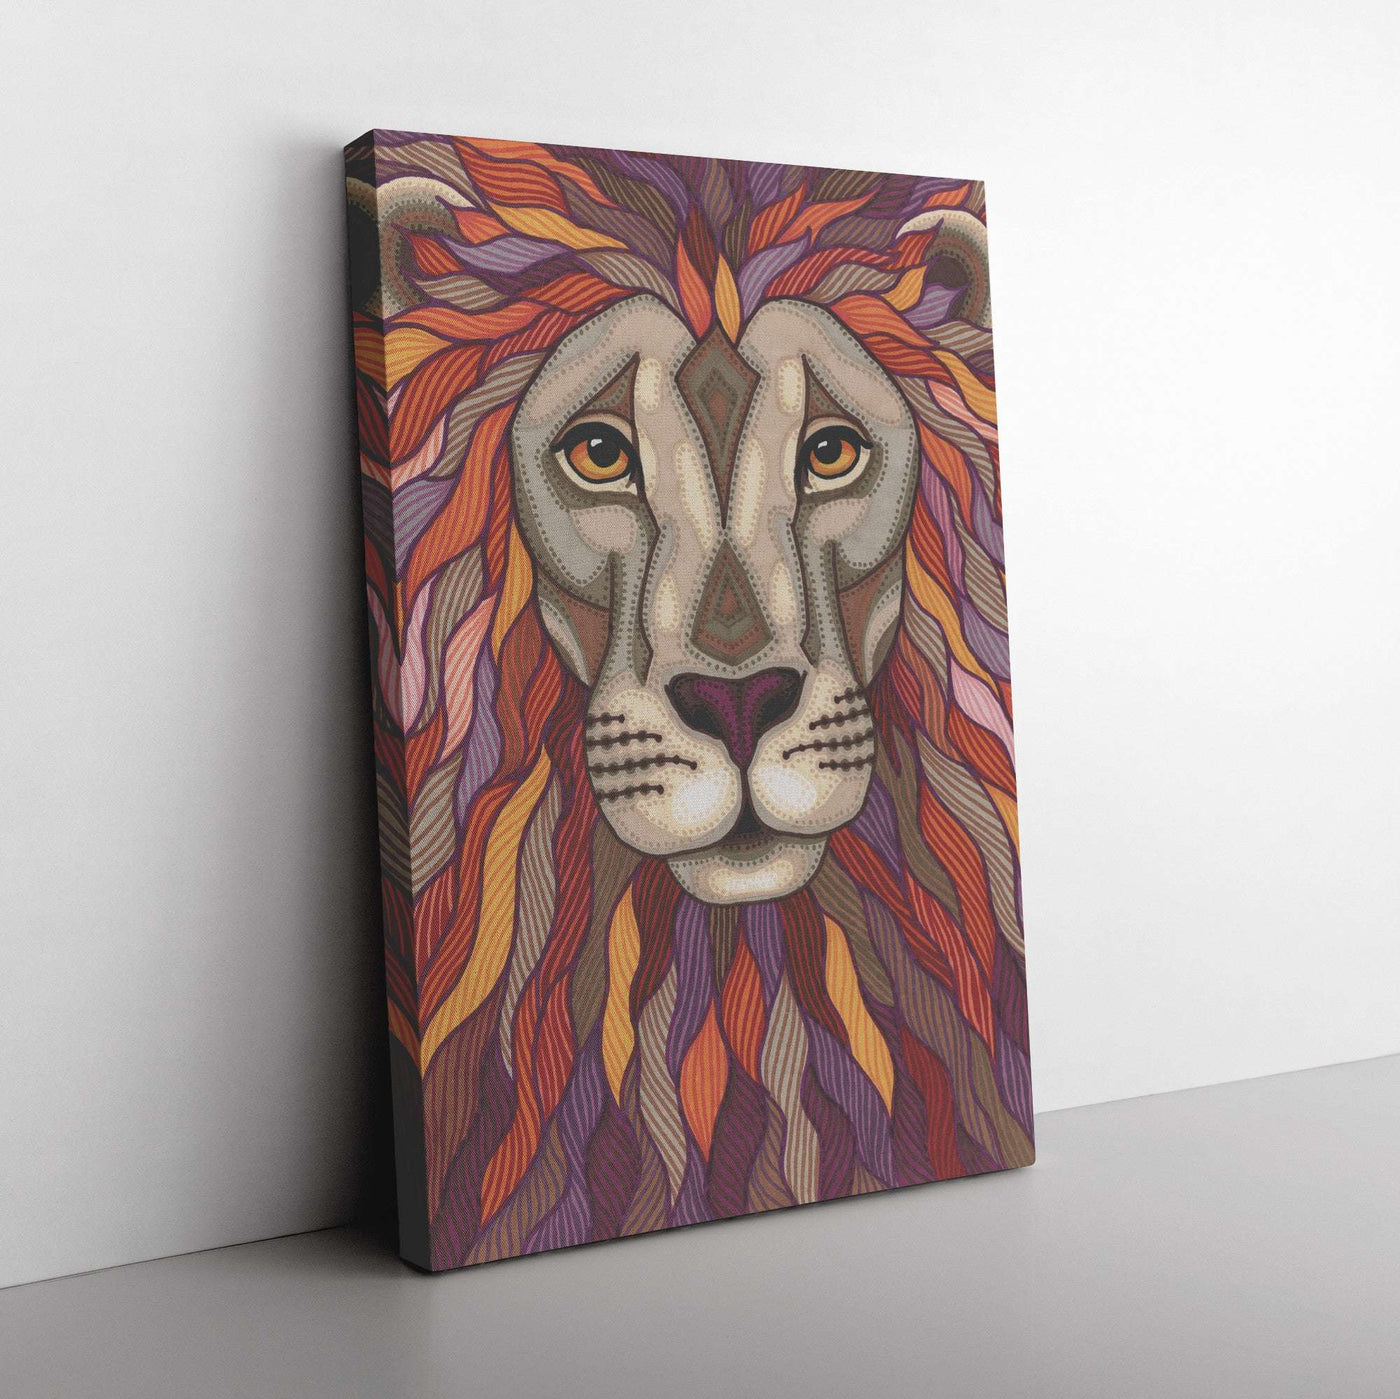 A Lion Pride Canvas Print featuring a stylized lion with a detailed, colorful mane, displayed on a white wall.